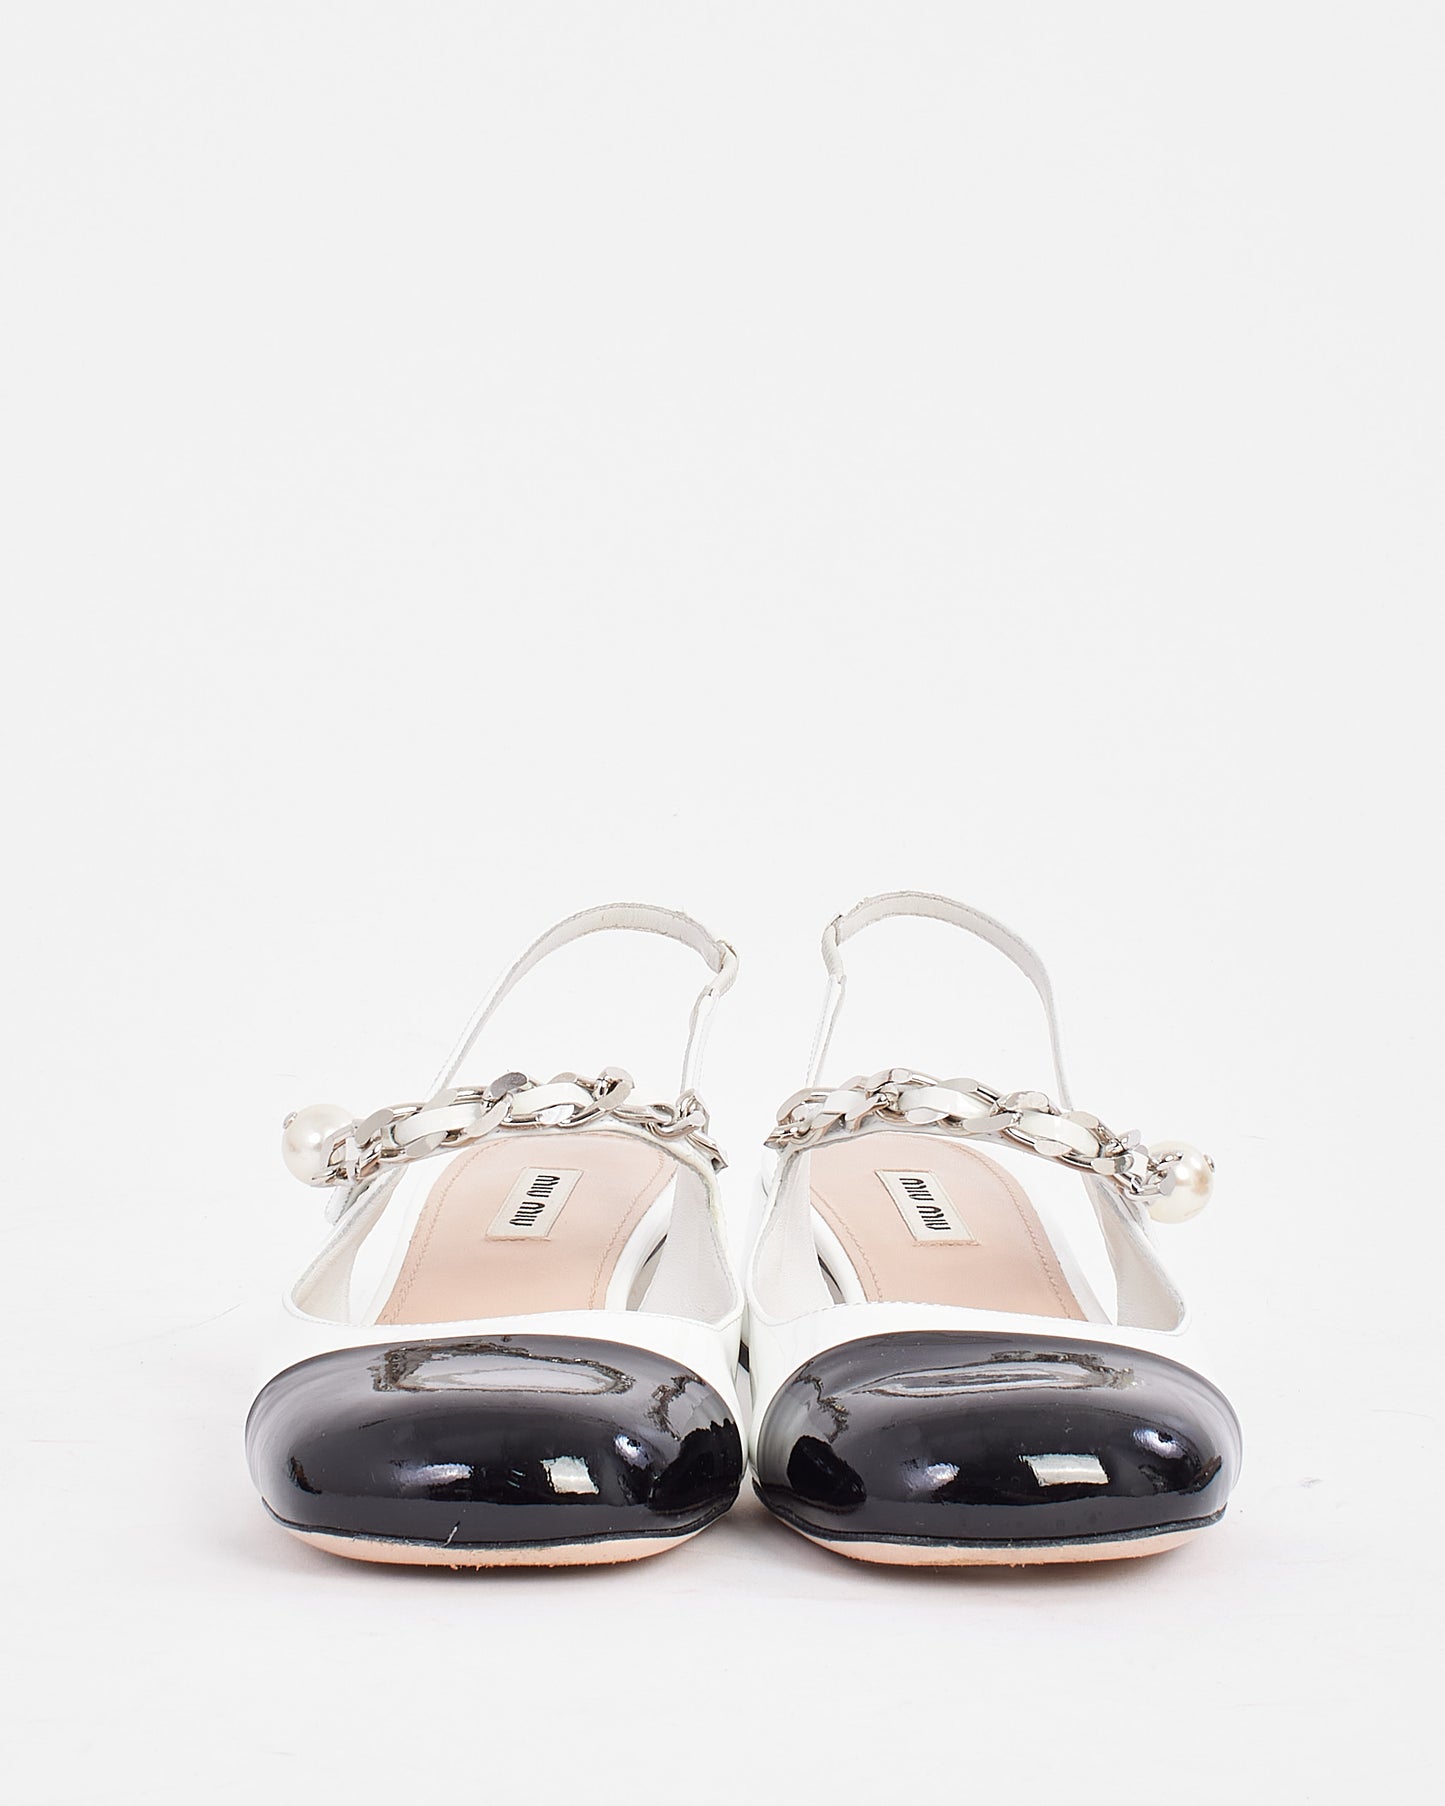 Miu Miu White Patent Leather Mary Jane Pumps With Pearl Strap - 37.5